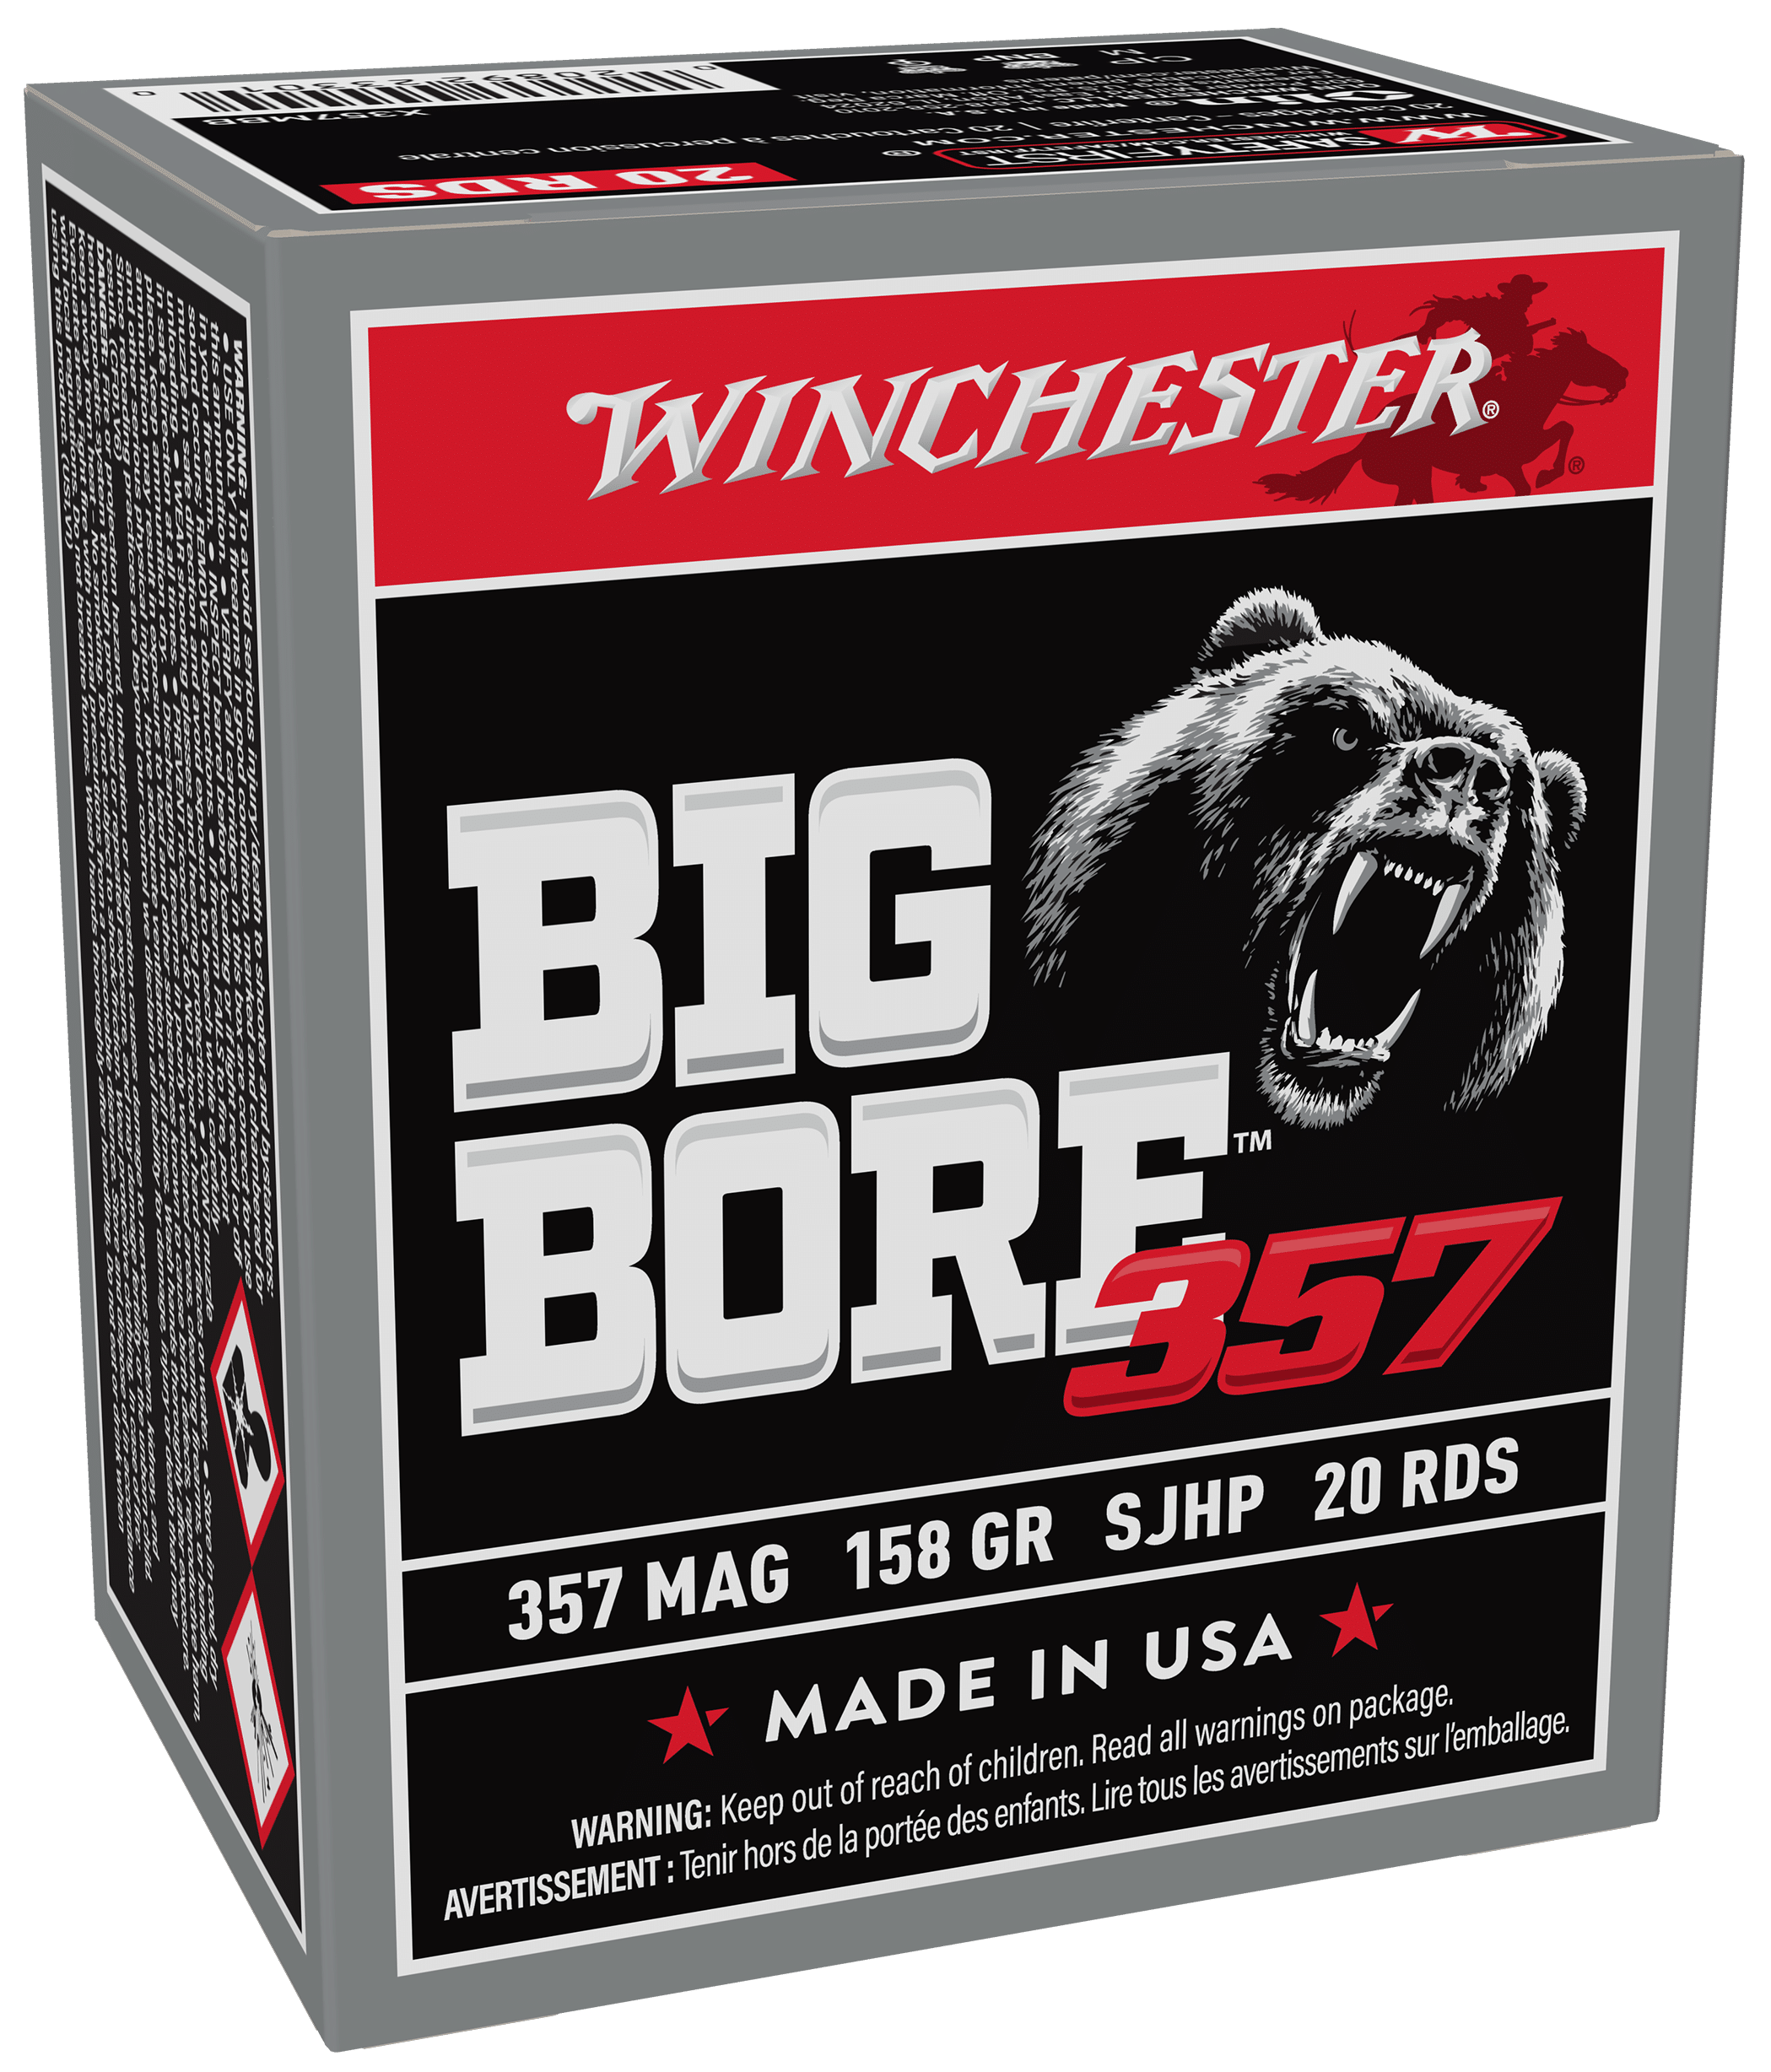 https://cityarsenal.com/product/winchester-ammo-big-bore-357-mag158-gr-semi-jacketed-hollow-point-20-rd-box-x357mbb/